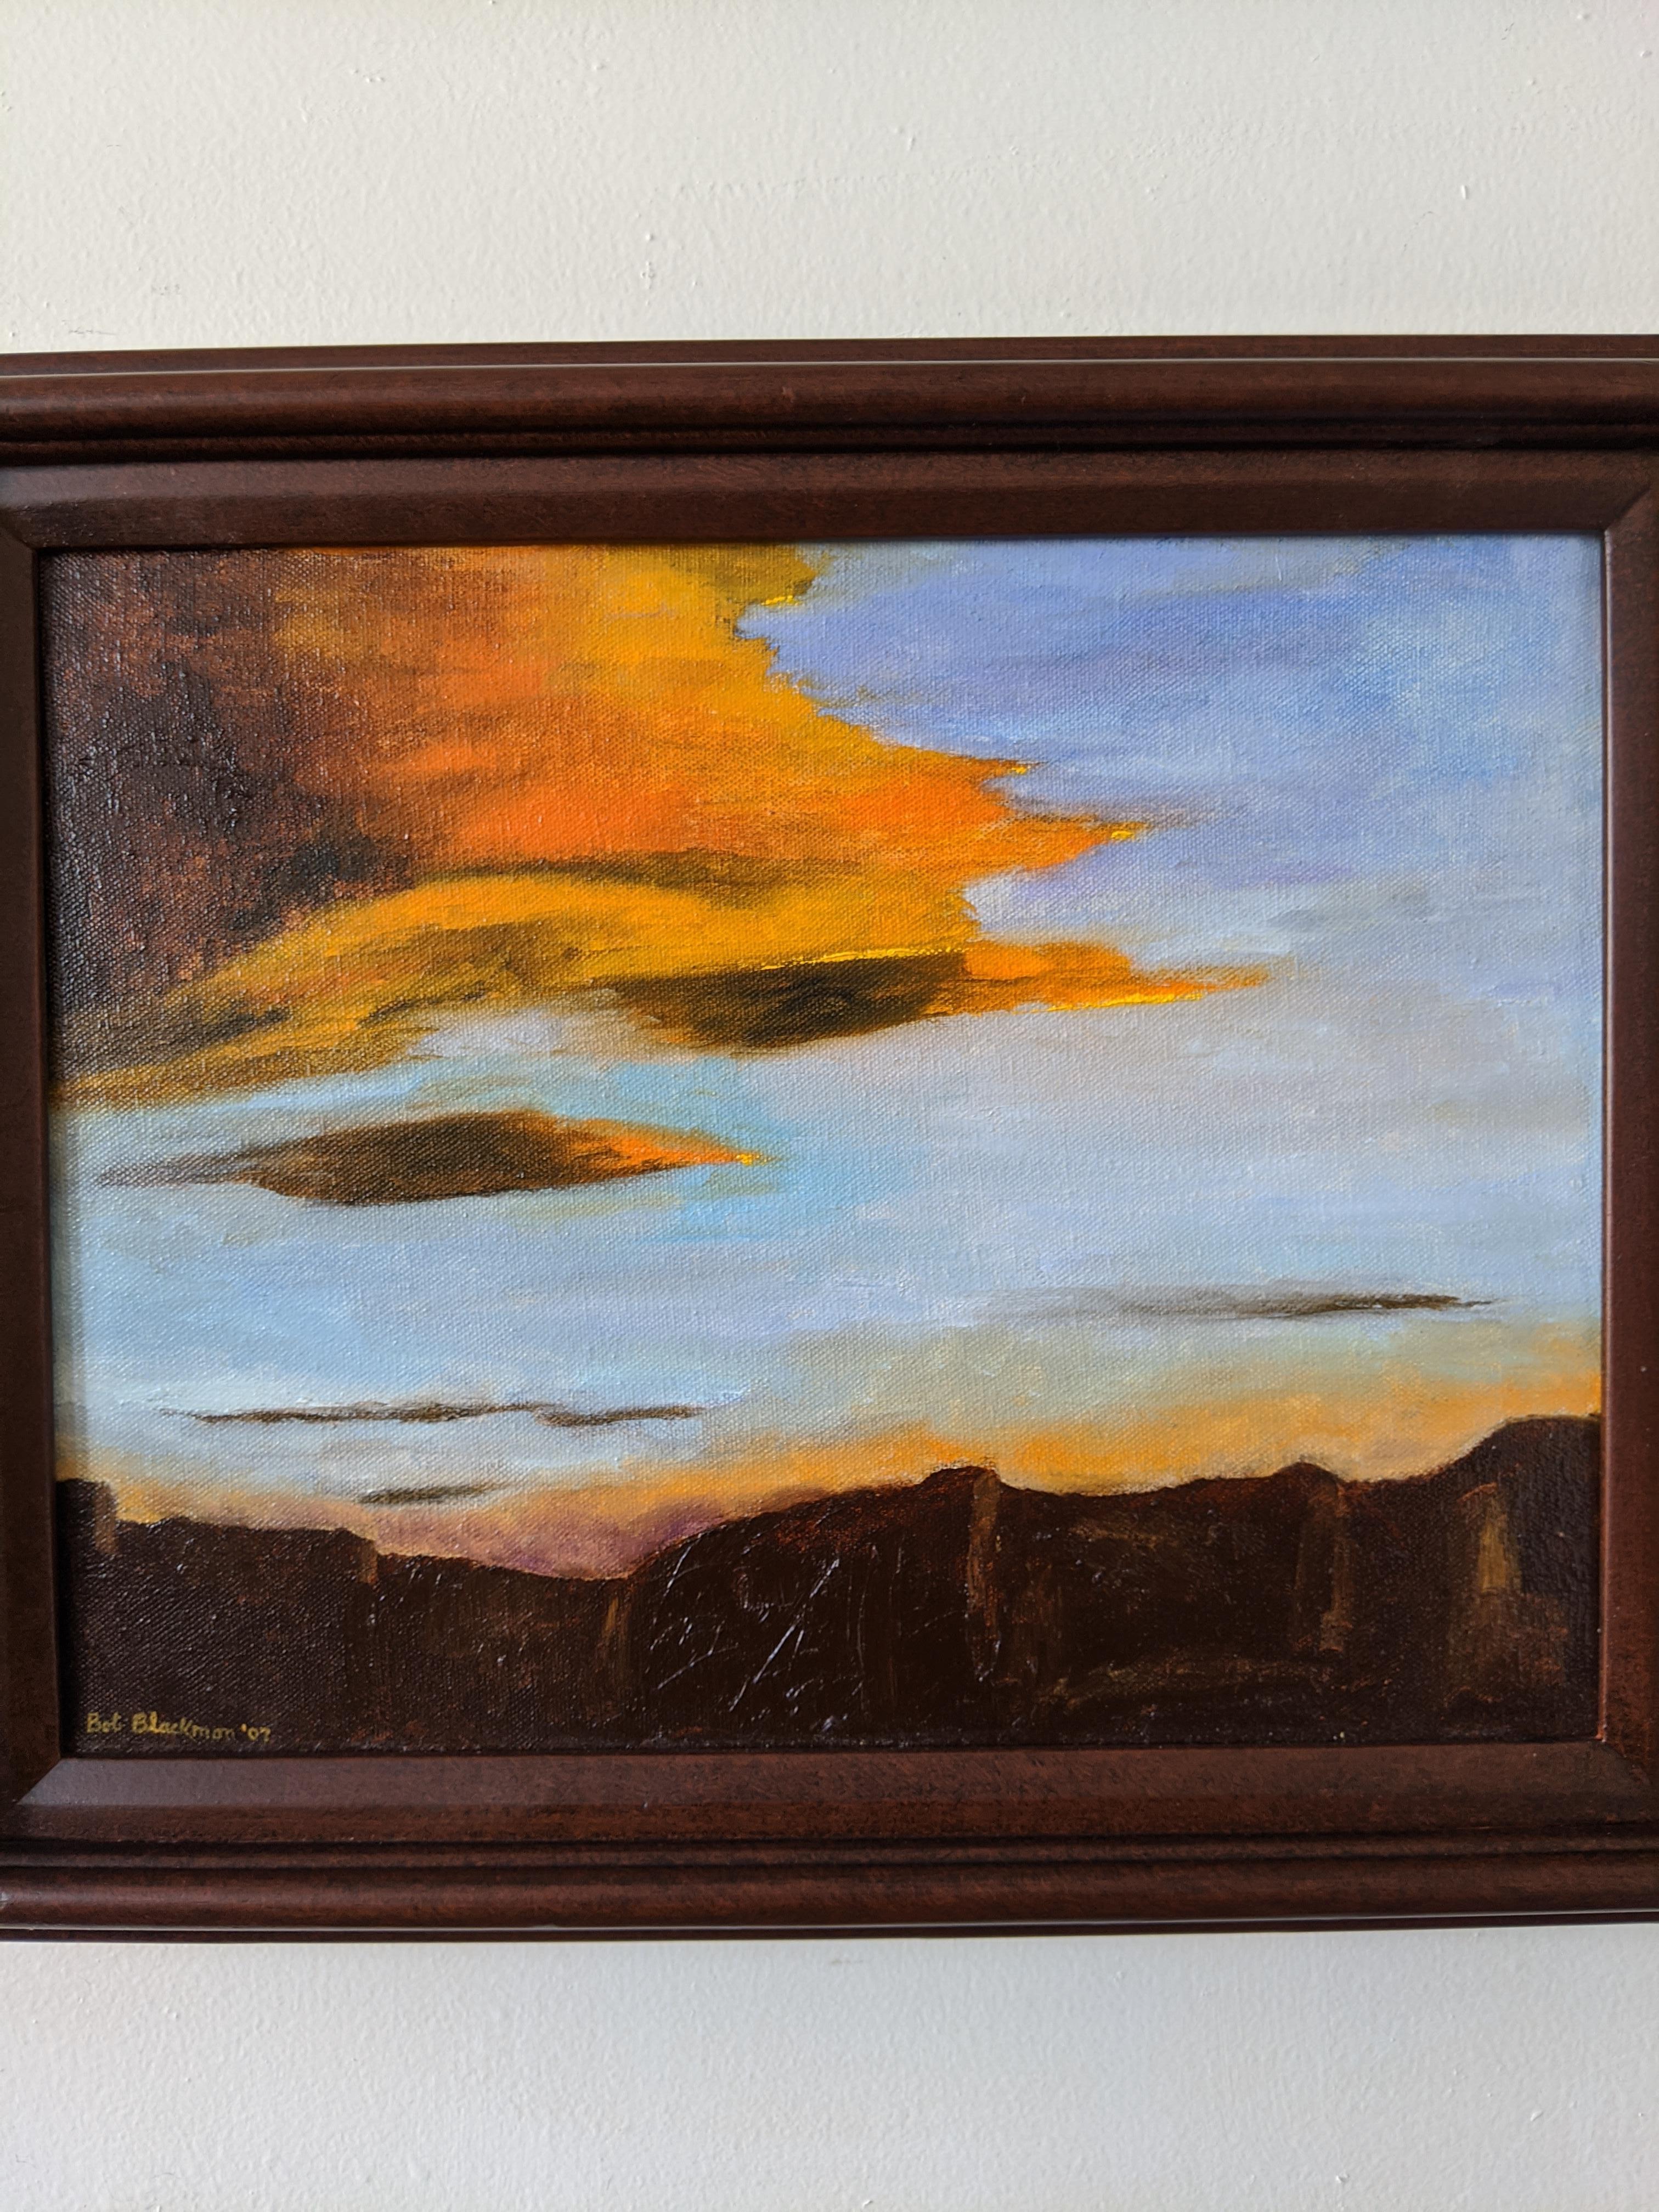 This oil on canvas piece features a vibrant sunset with a complementary color scheme of orange and blue. The burnt umber rock and patches in the sky ground the composition and balance out the expanse of the horizon. The clouds reflect the warmth of